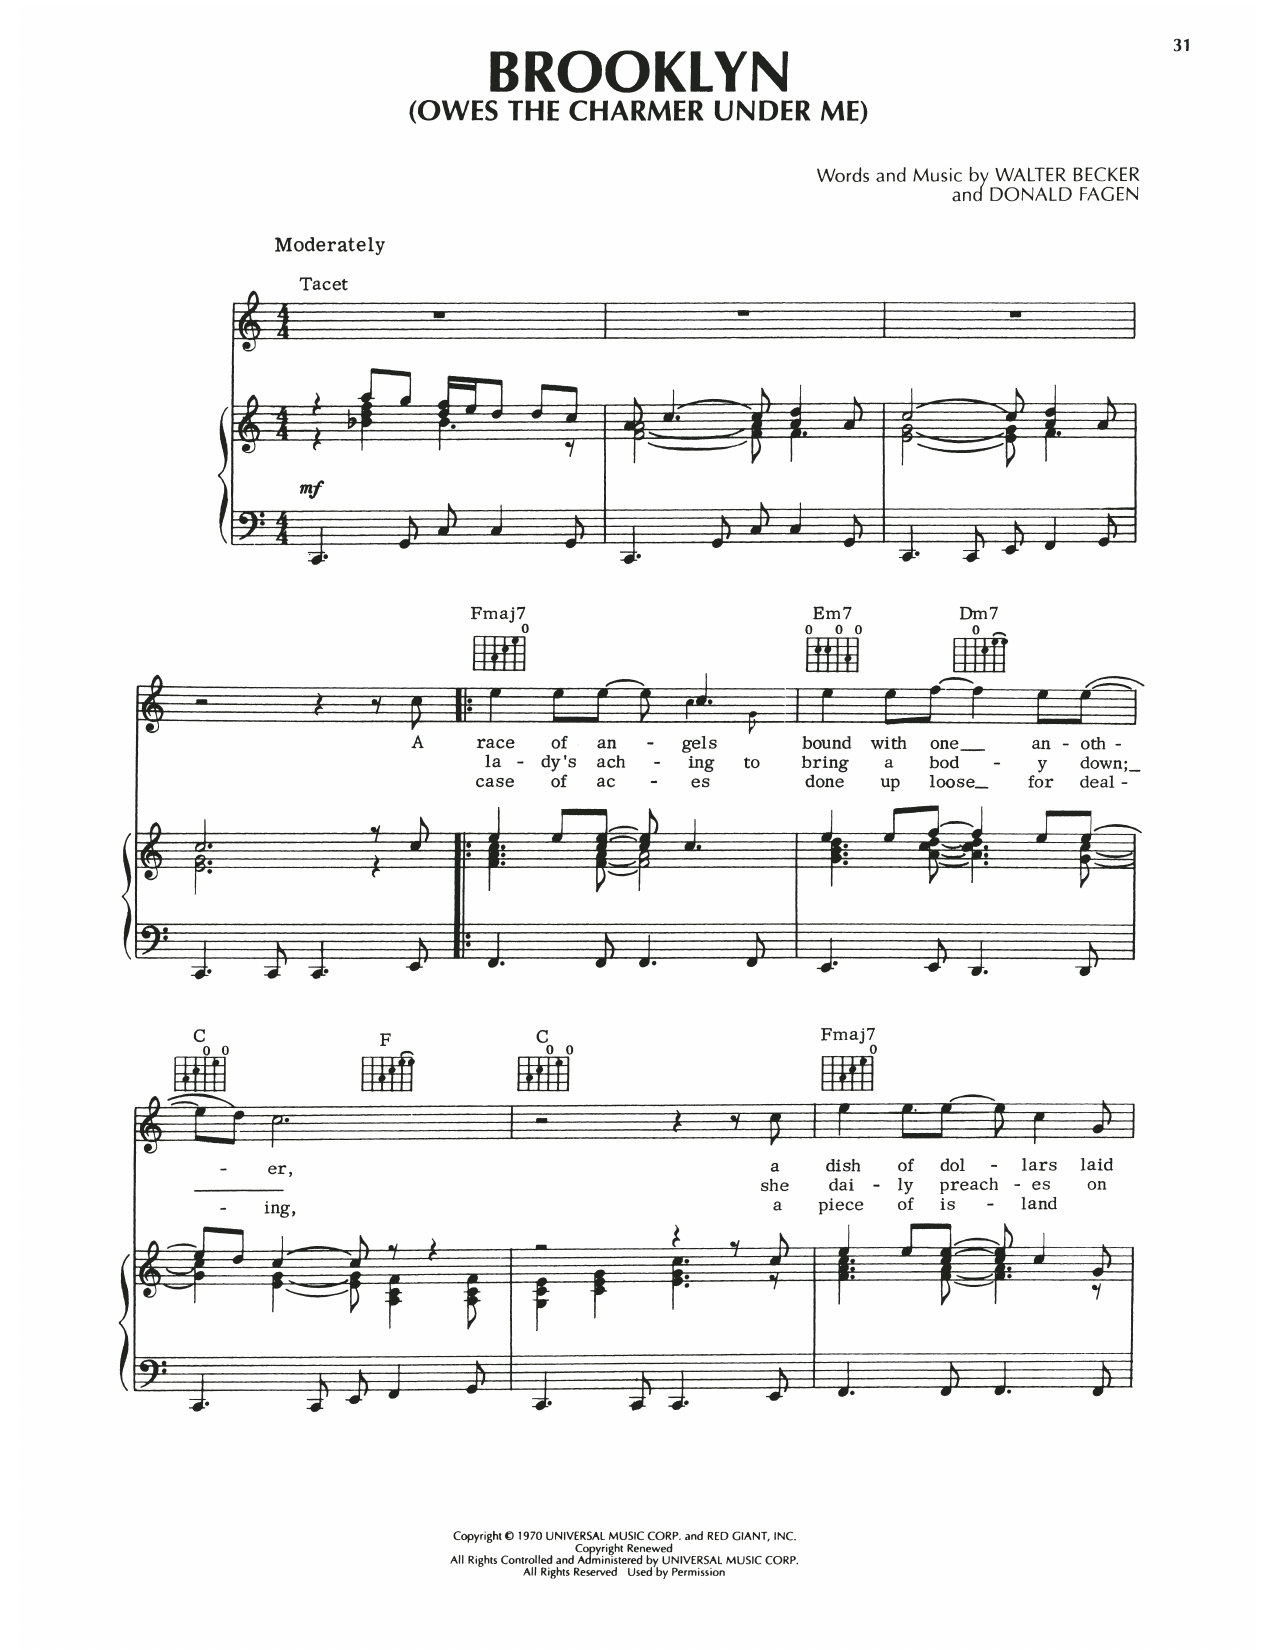 Download Steely Dan Brooklyn (Owes The Charmer Under Me) Sheet Music